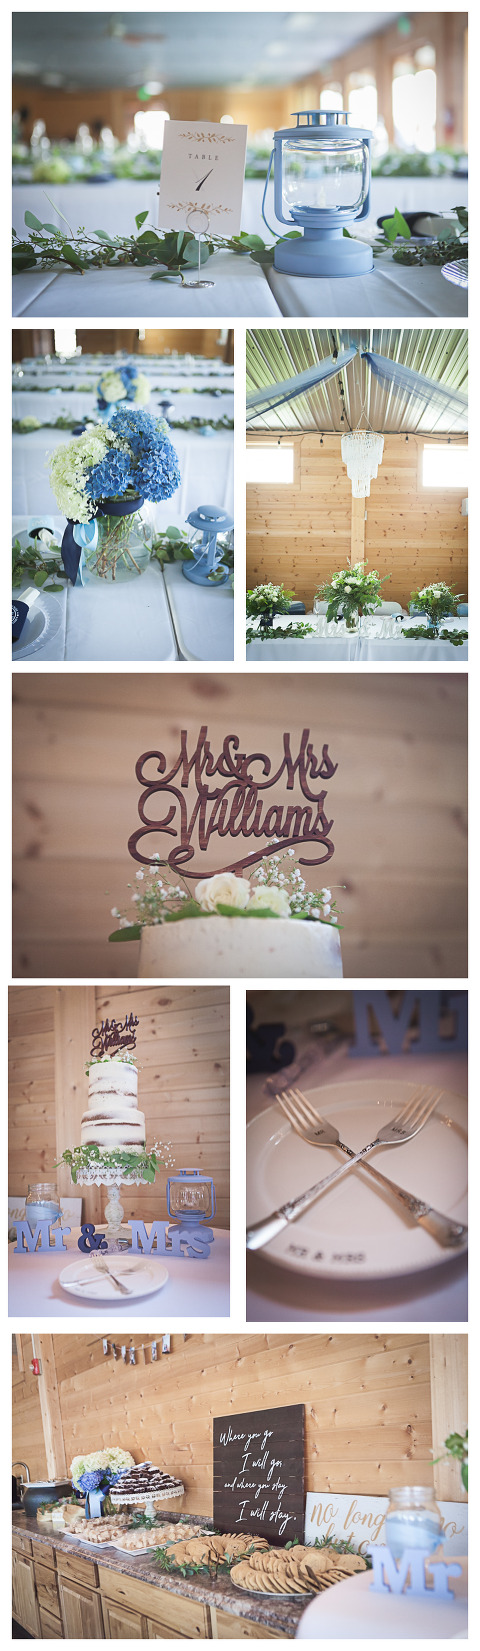 reception details,Jerome & Michelle married at McInosh barn in Ellensburg photographed by Hailey Haberman Ellensburg Wedding Photographer